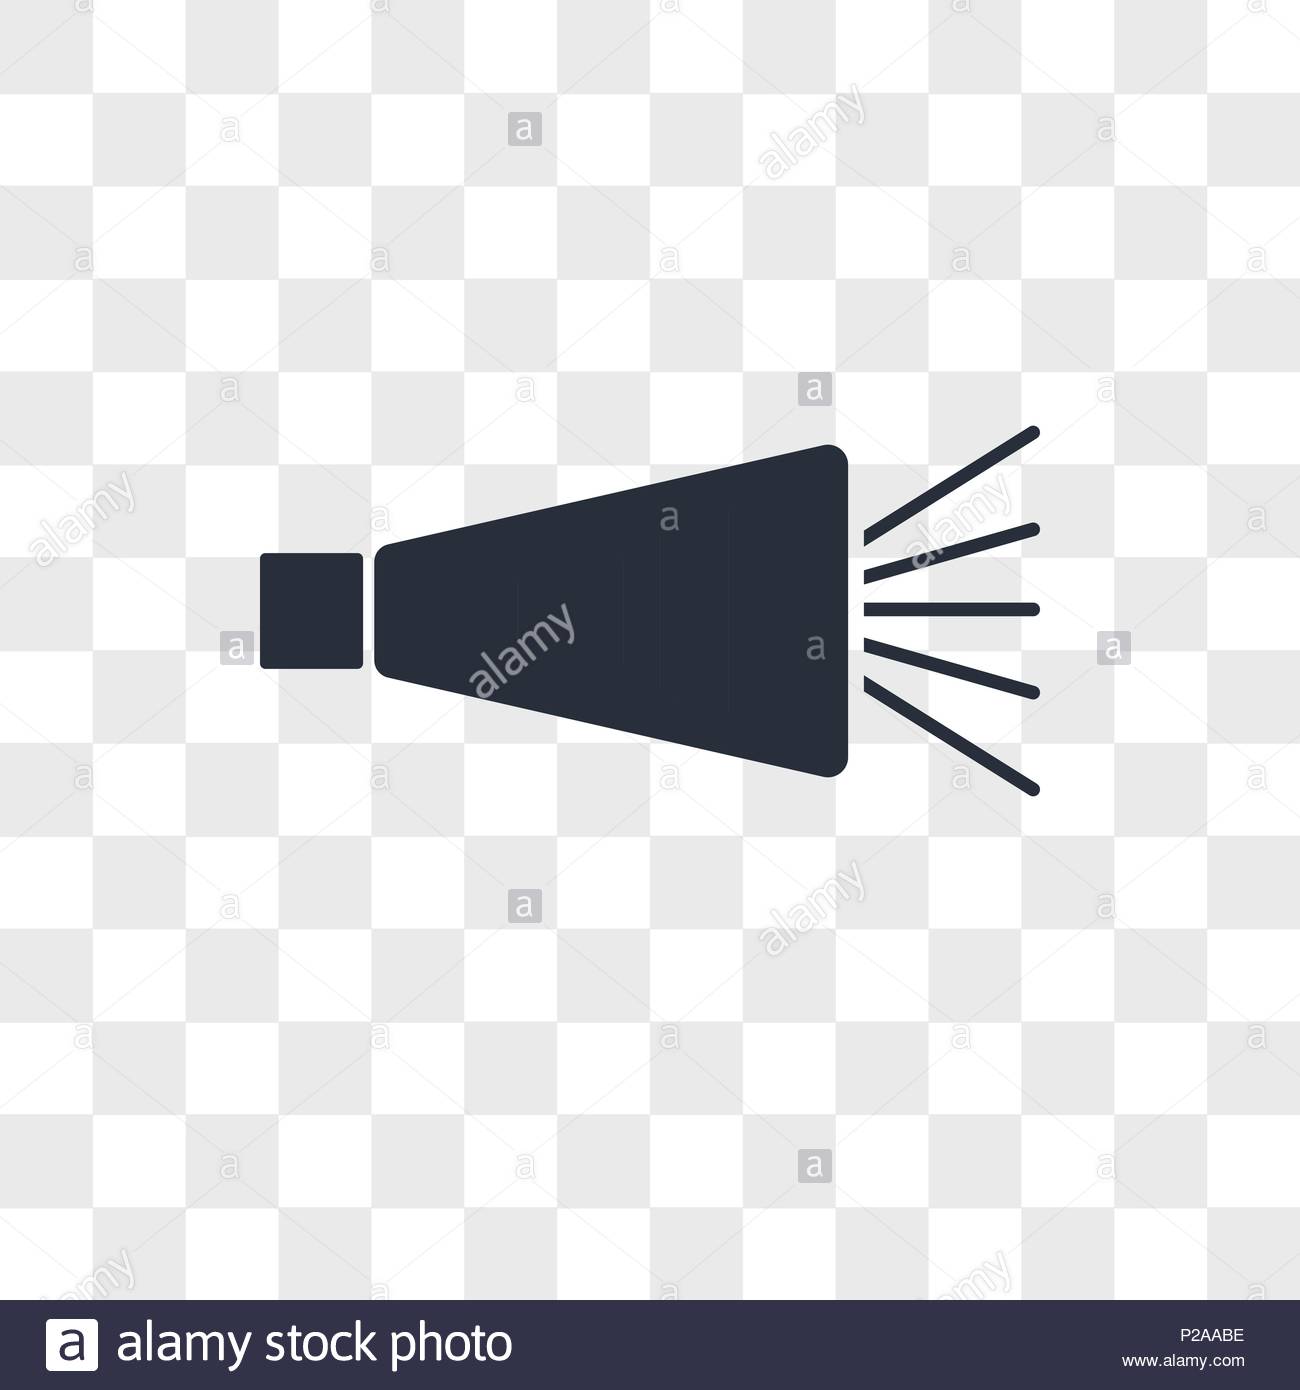 Noisemaker Vector Icon Isolated On Transparent Background